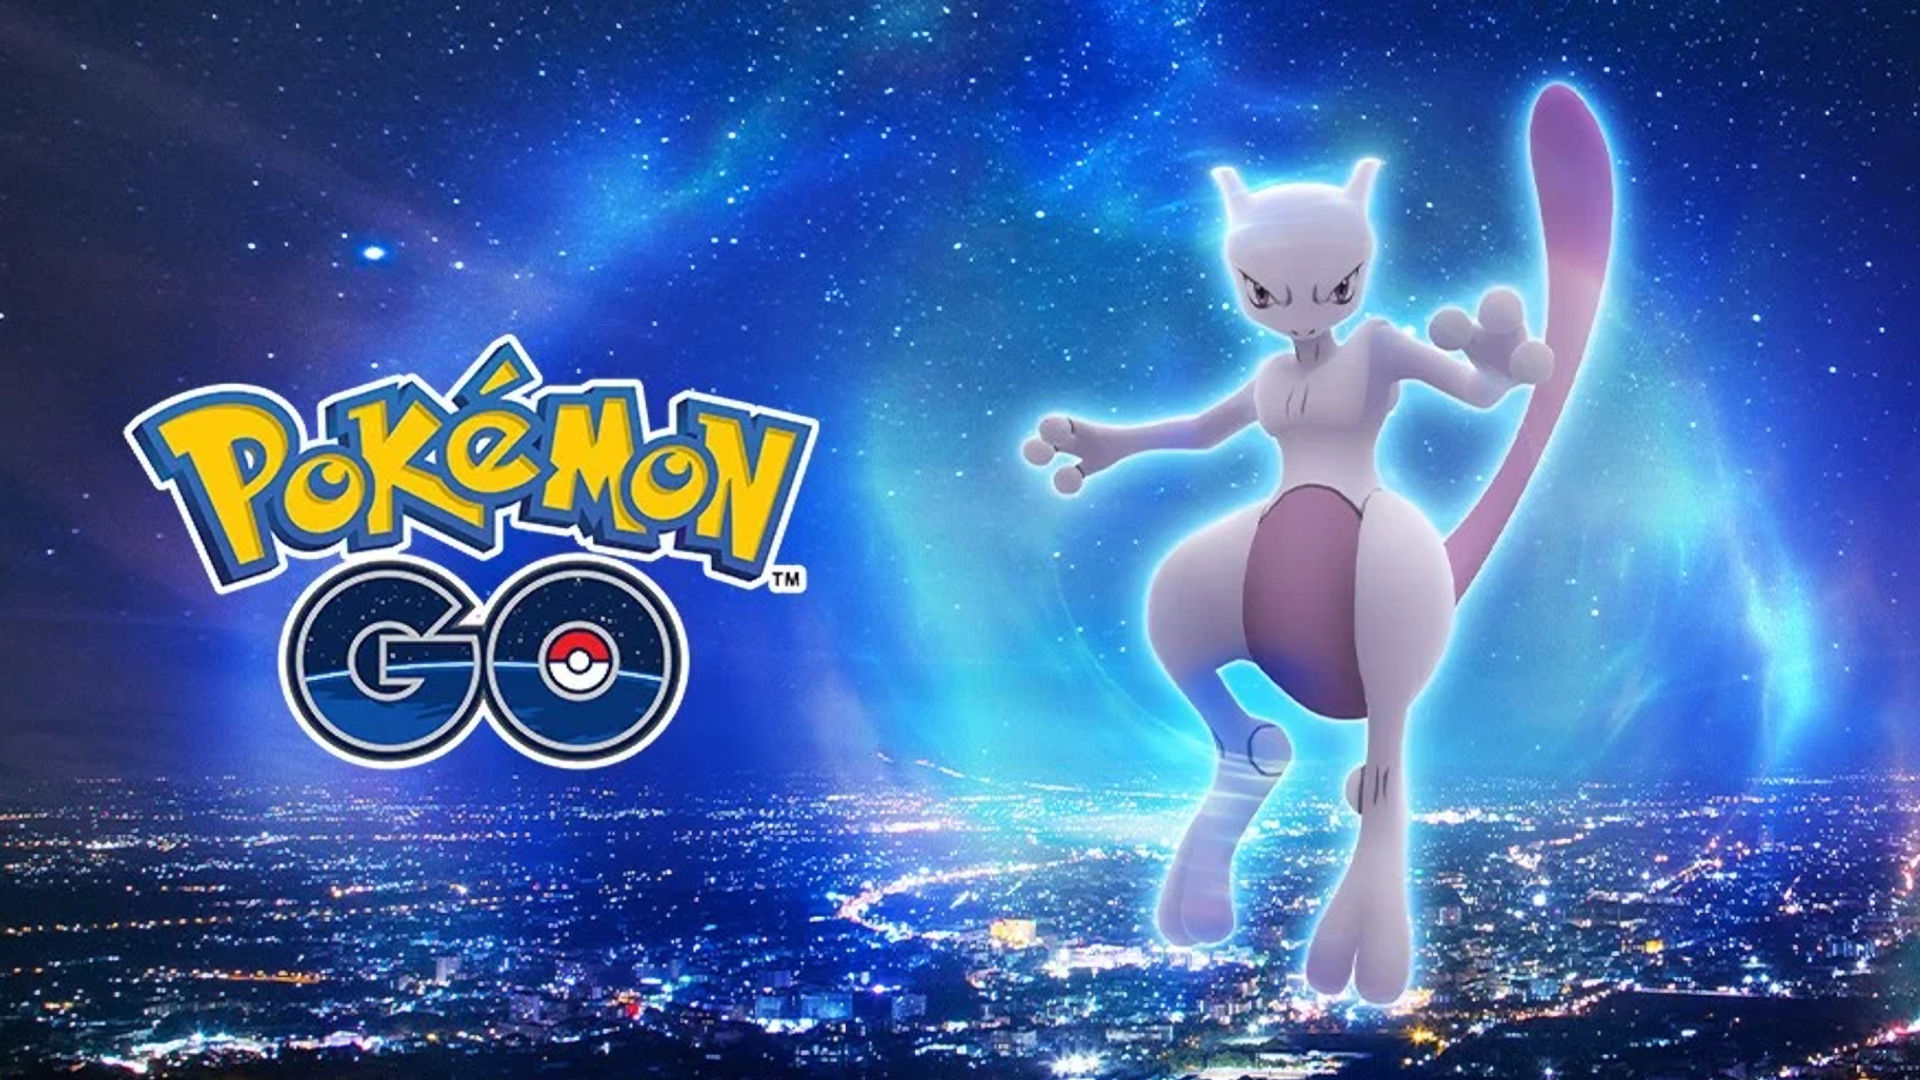 Pokemon go mewtwo against a cityscape, with the game logo